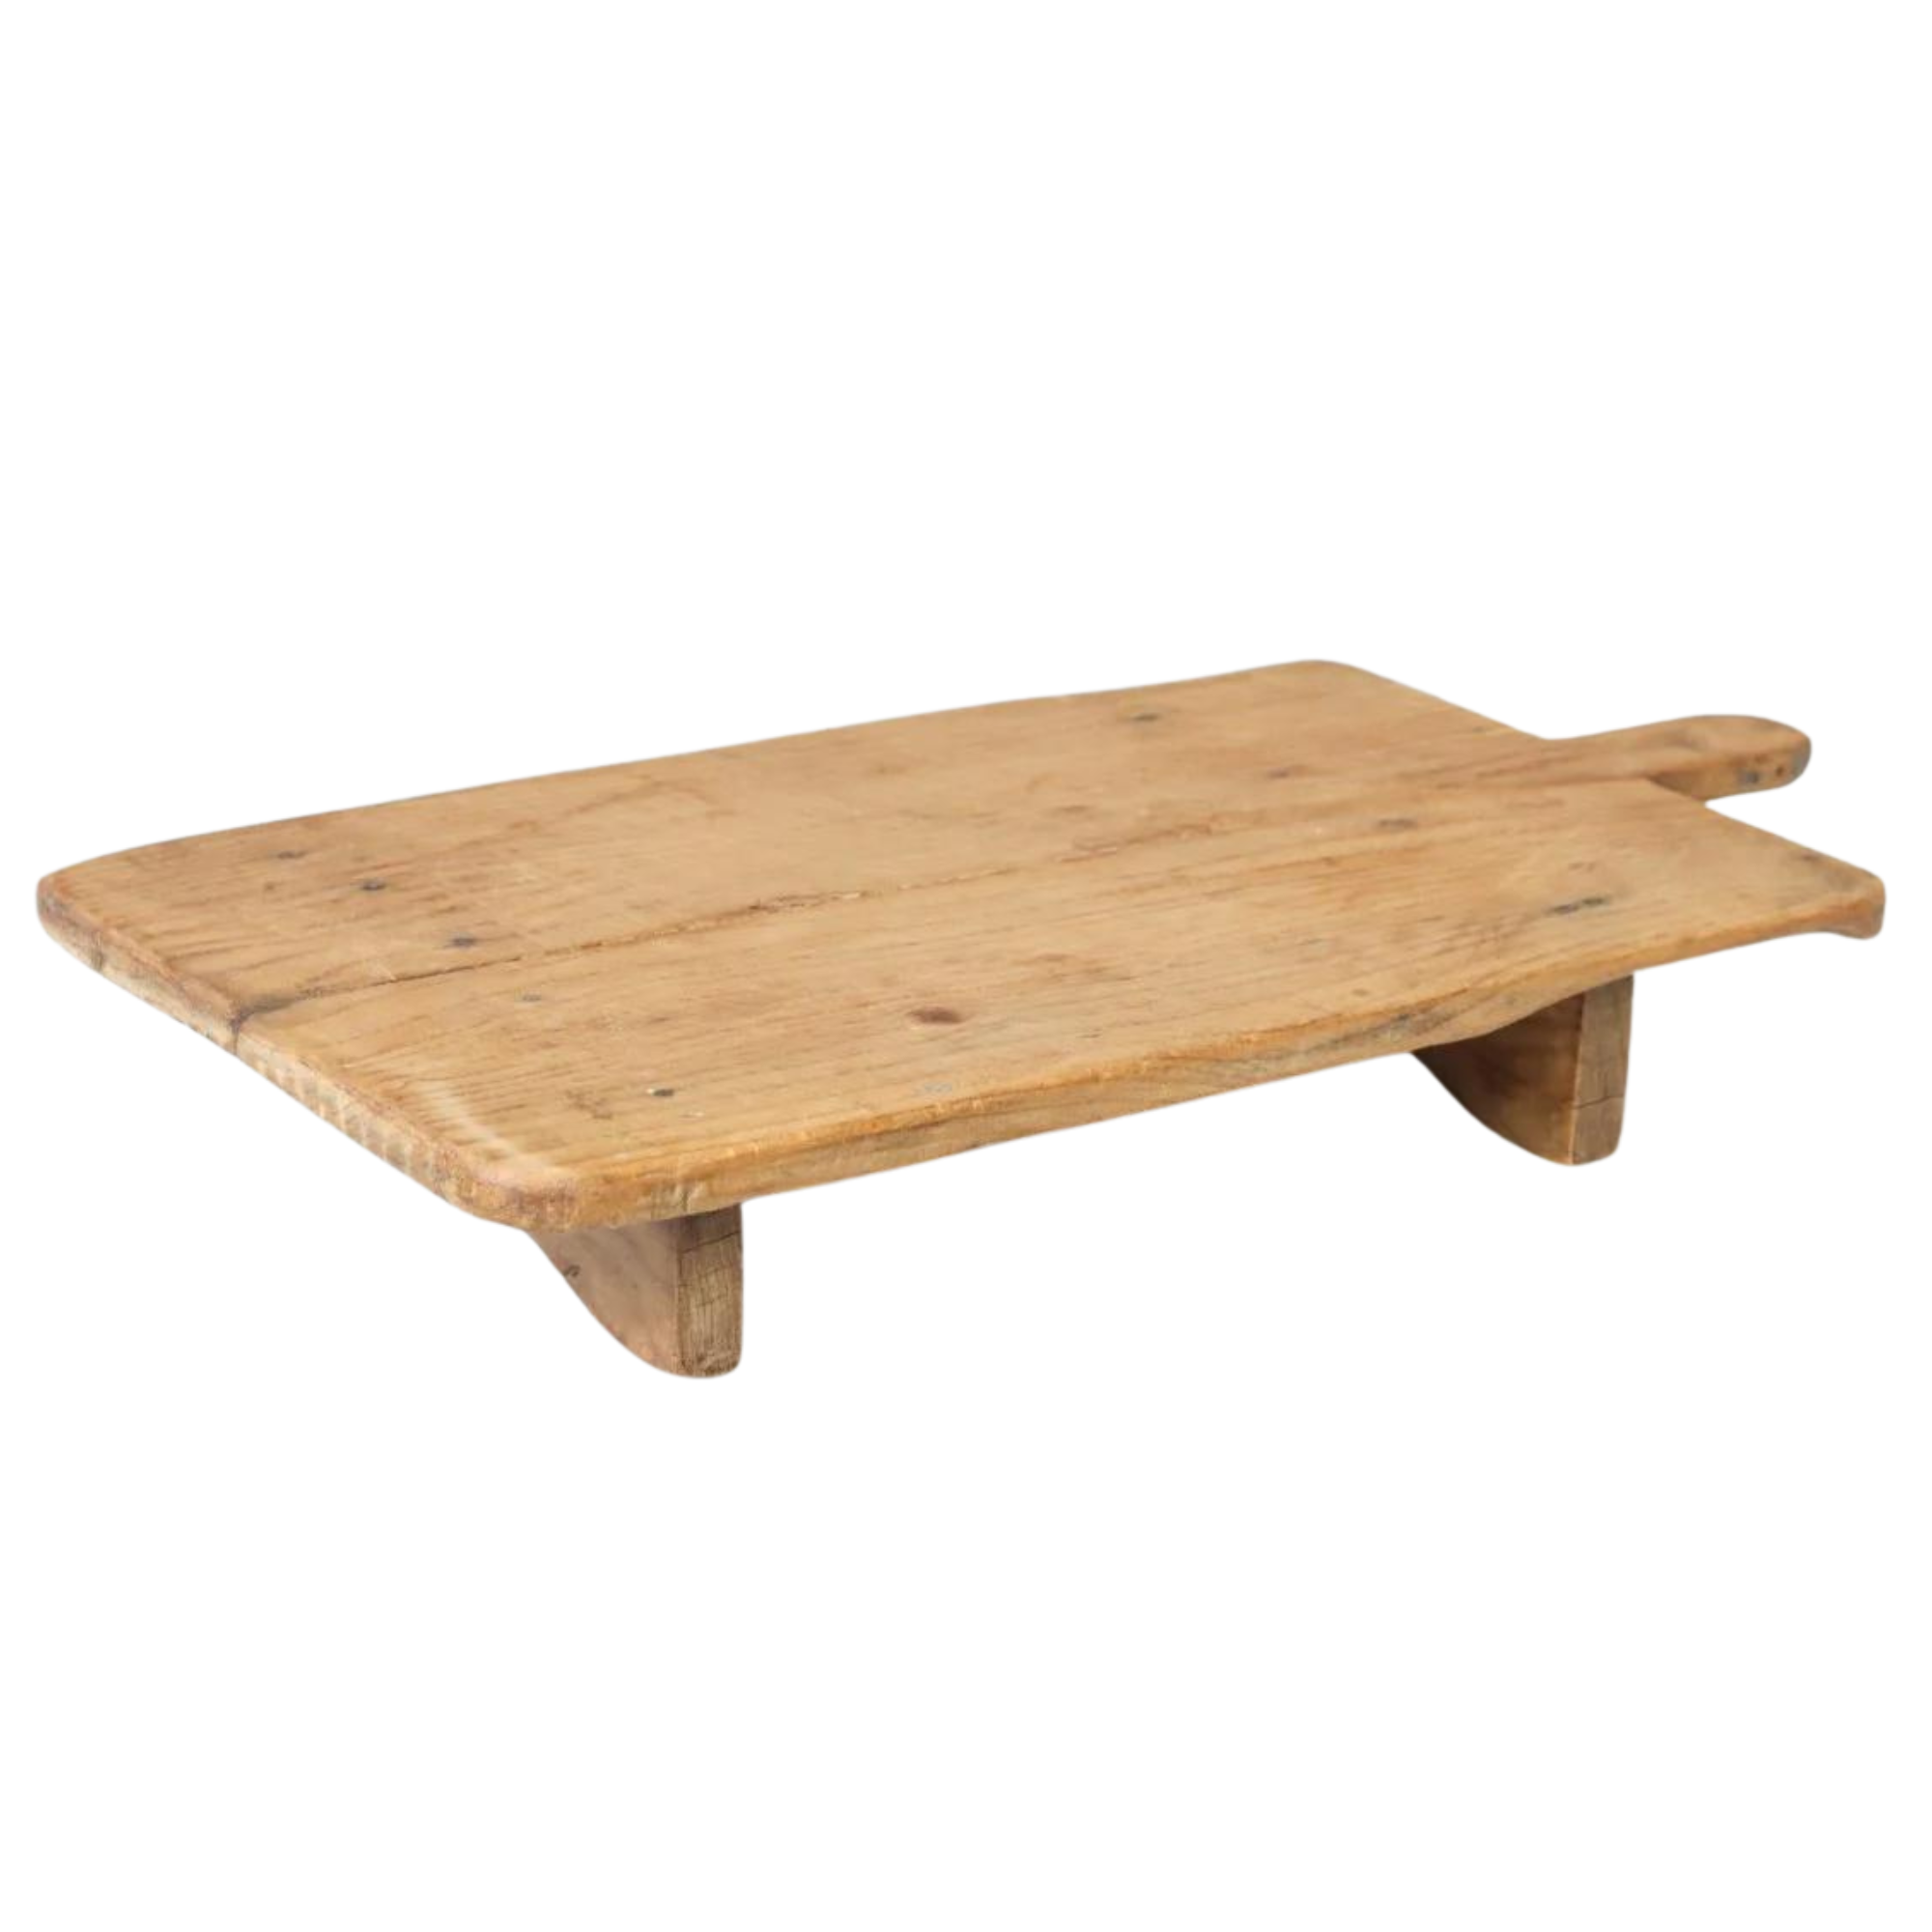 Found Rectangle Footed Board